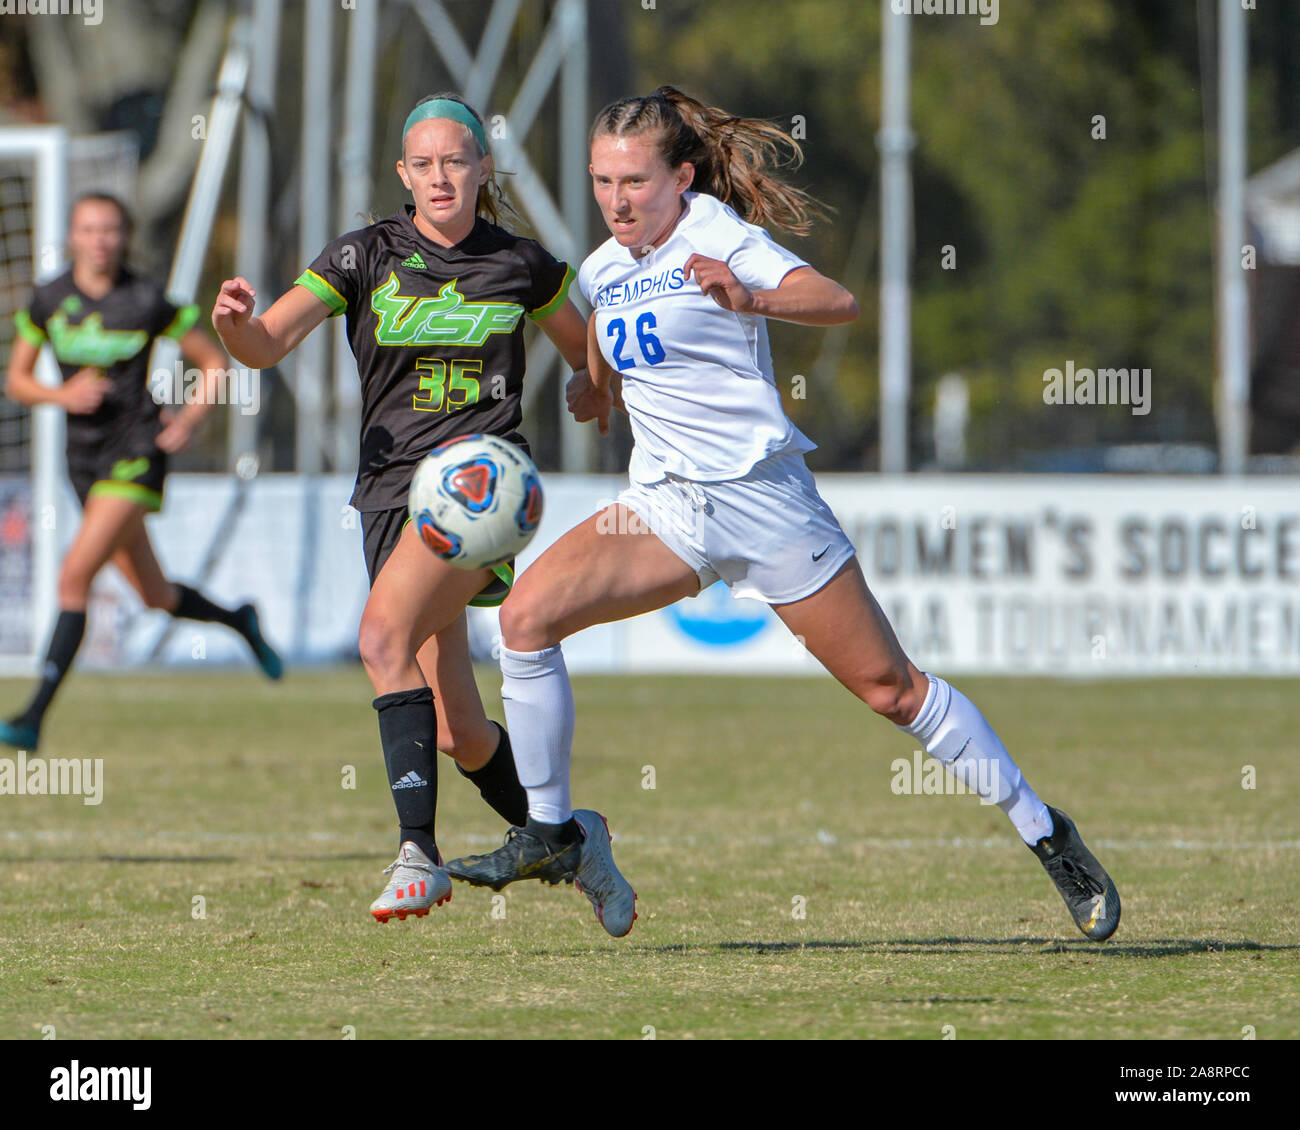 Memphis, TN, USA. 10th Nov, 2019. South Florida forward, Sydny Nasello (35) and Memphis defender, Stasia Mallin (26), work for ball control during the NCAA Women's Soccer Championship match between the University of South Florida Bulls and the University of Memphis Tigers at The University of Memphis in Memphis, TN. Kevin Langley/Sports South Media/CSM/Alamy Live News Stock Photo